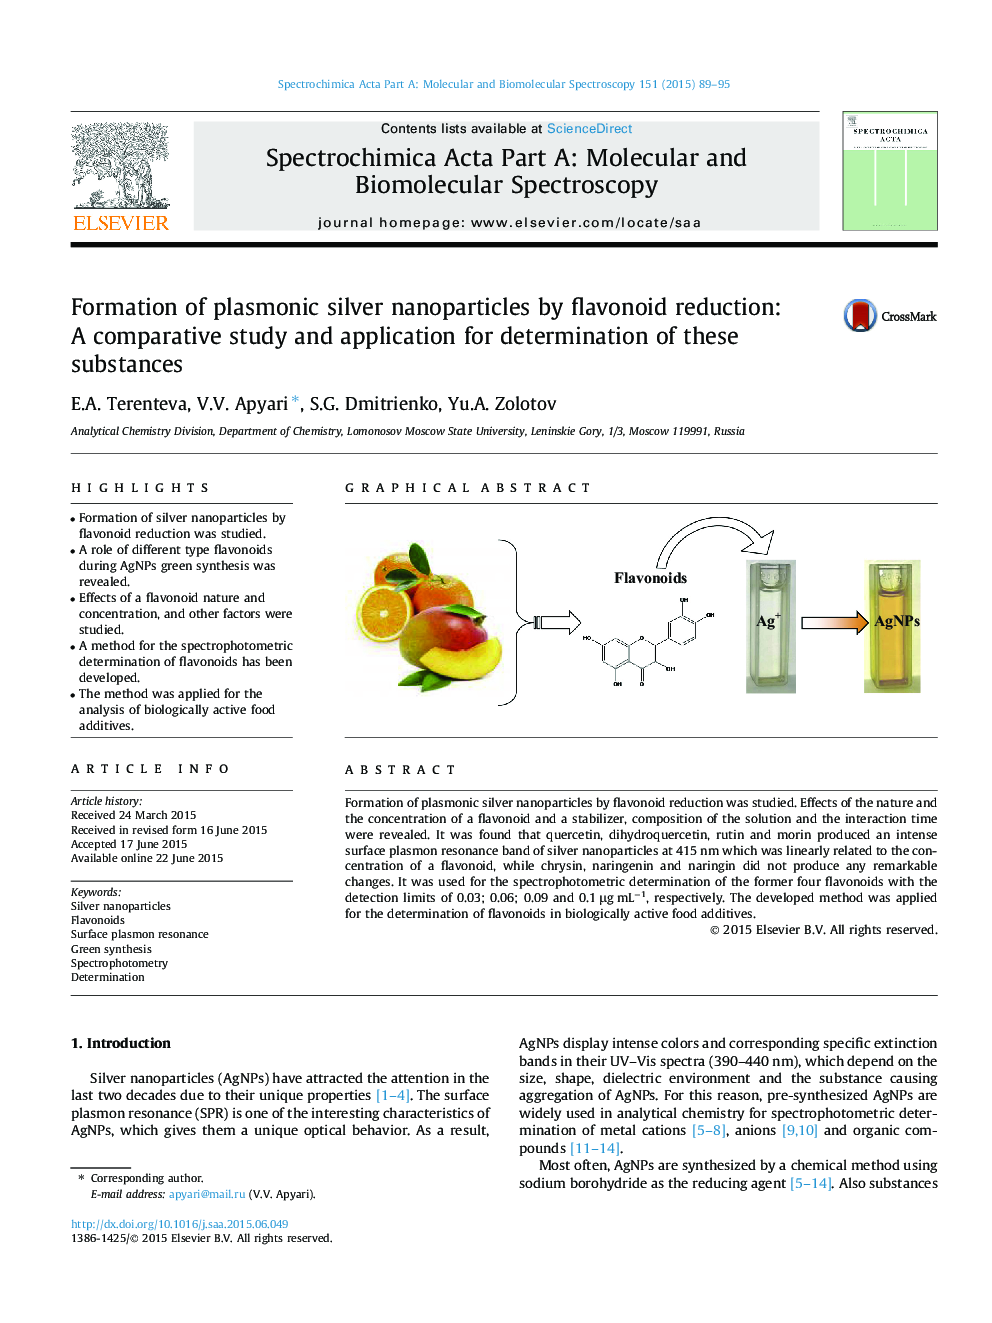 Formation of plasmonic silver nanoparticles by flavonoid reduction: A comparative study and application for determination of these substances